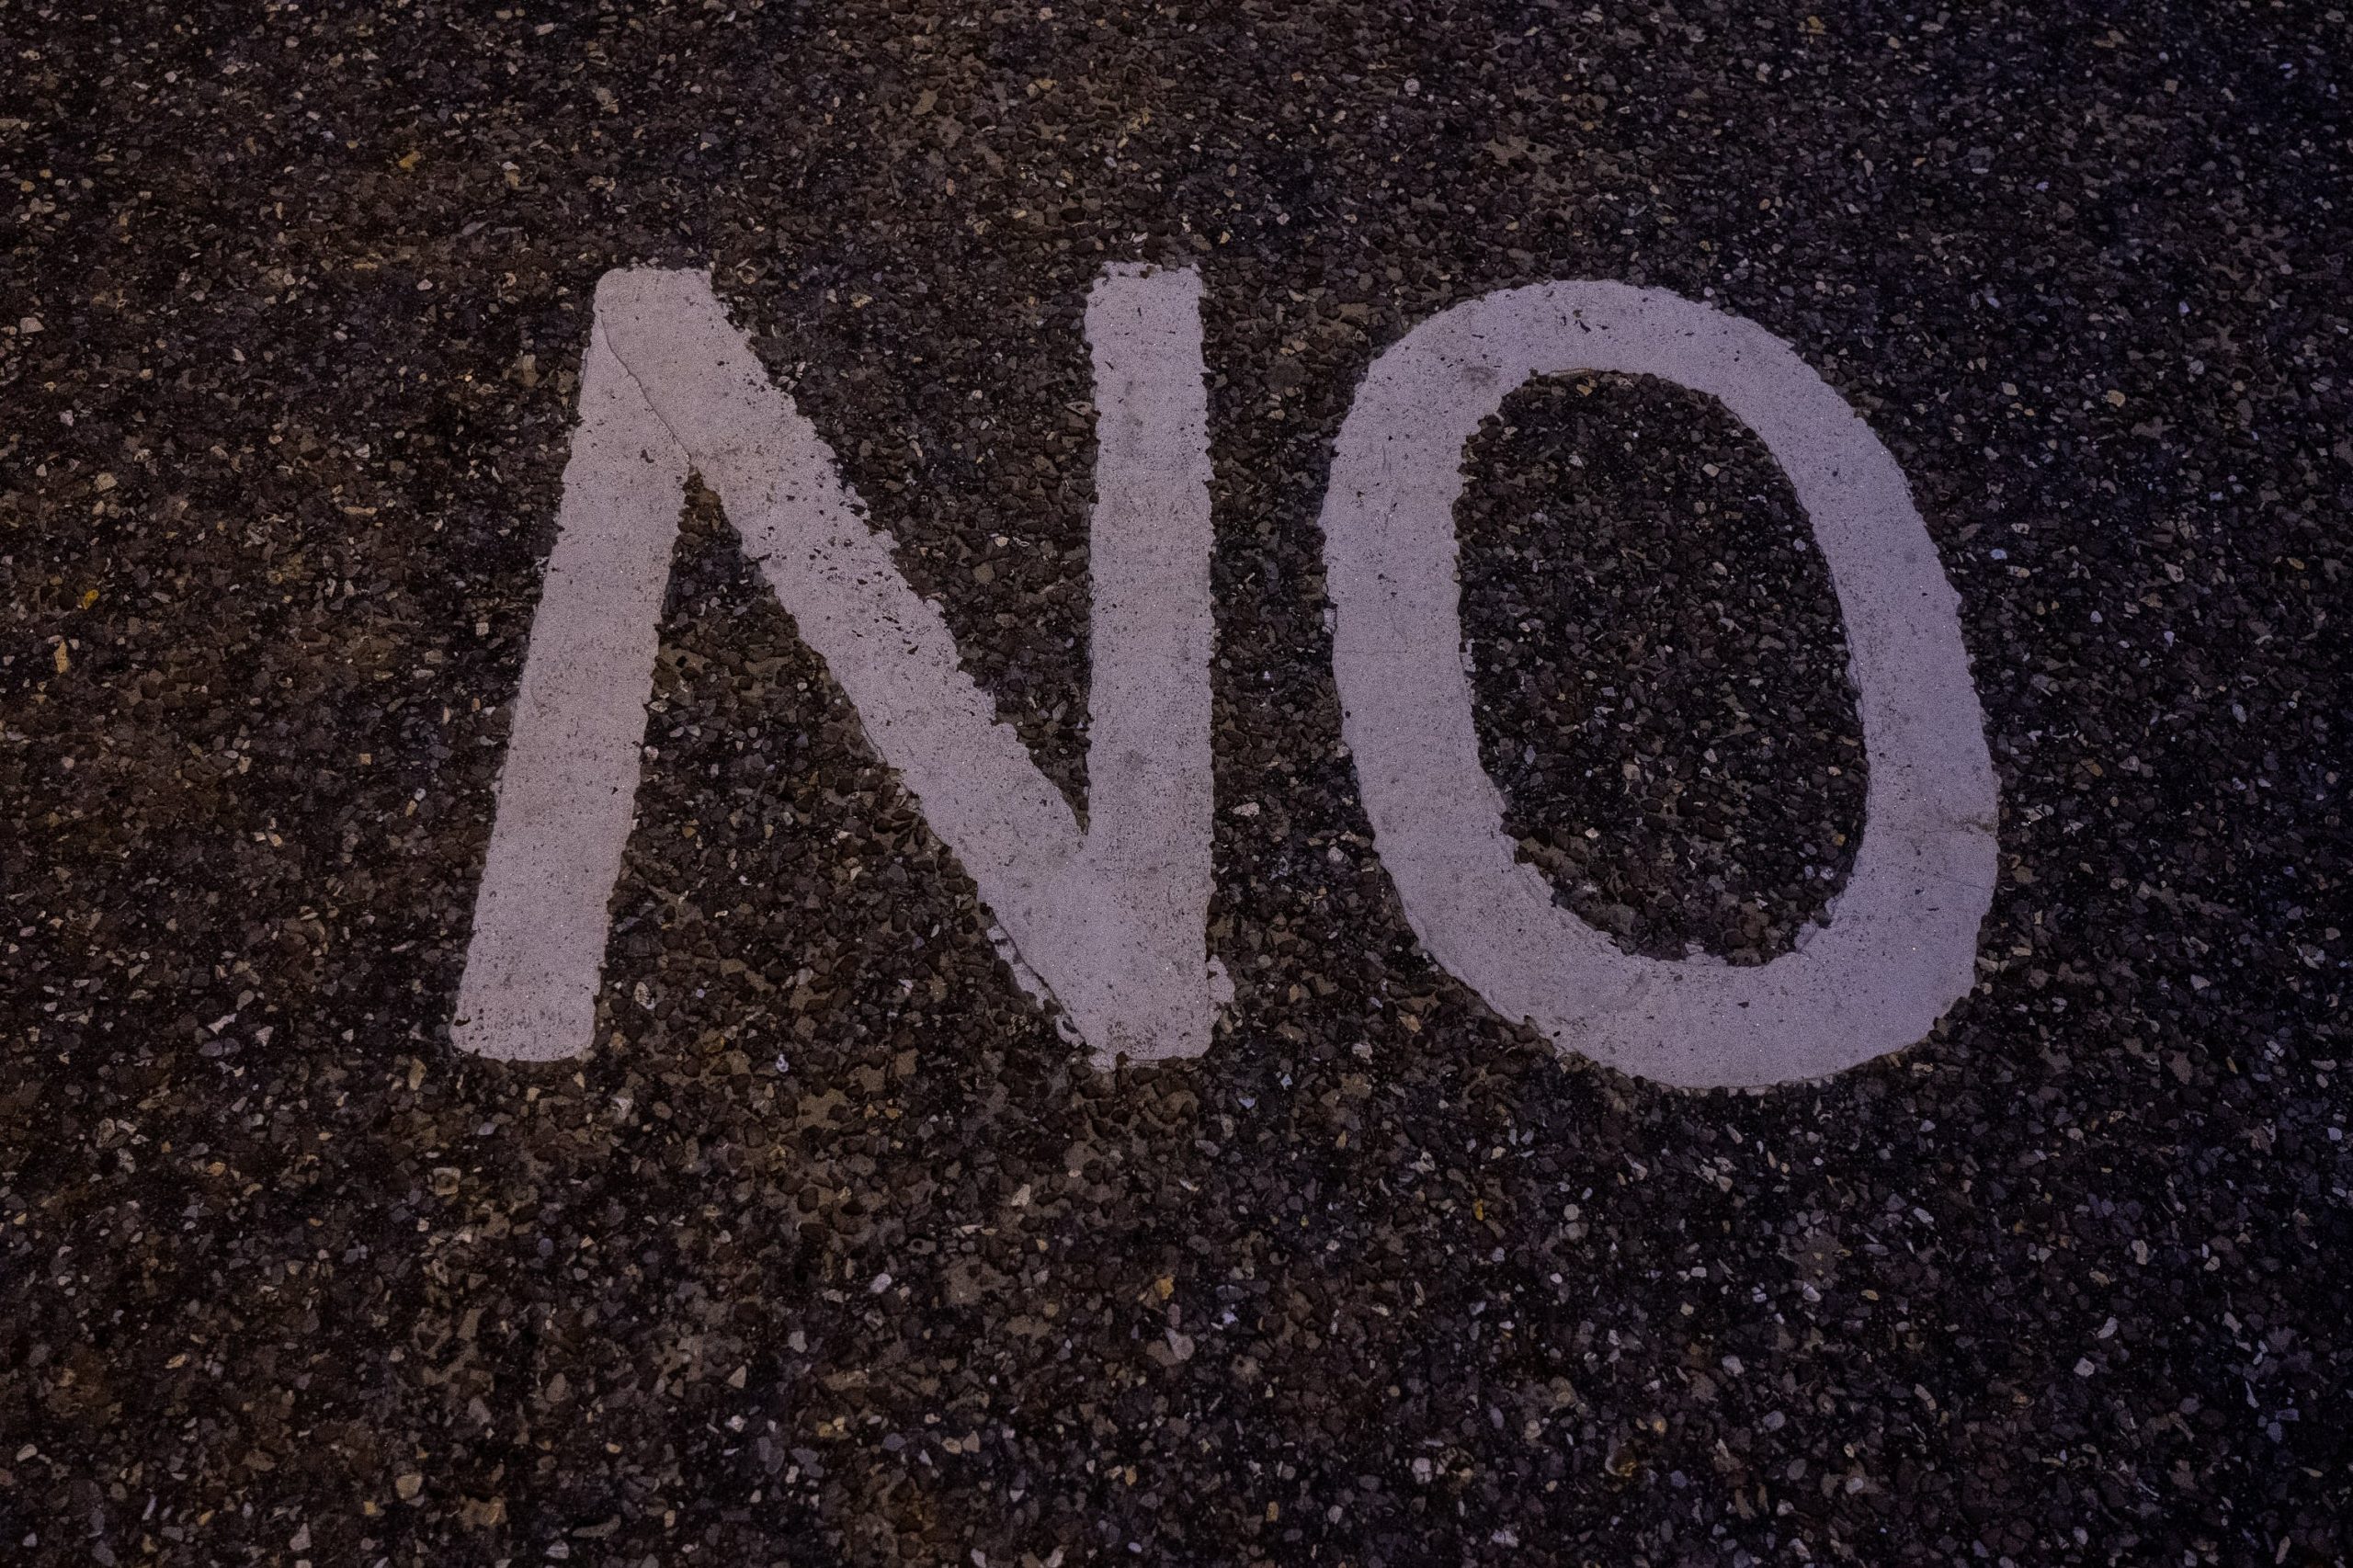 How to Say No In Australia